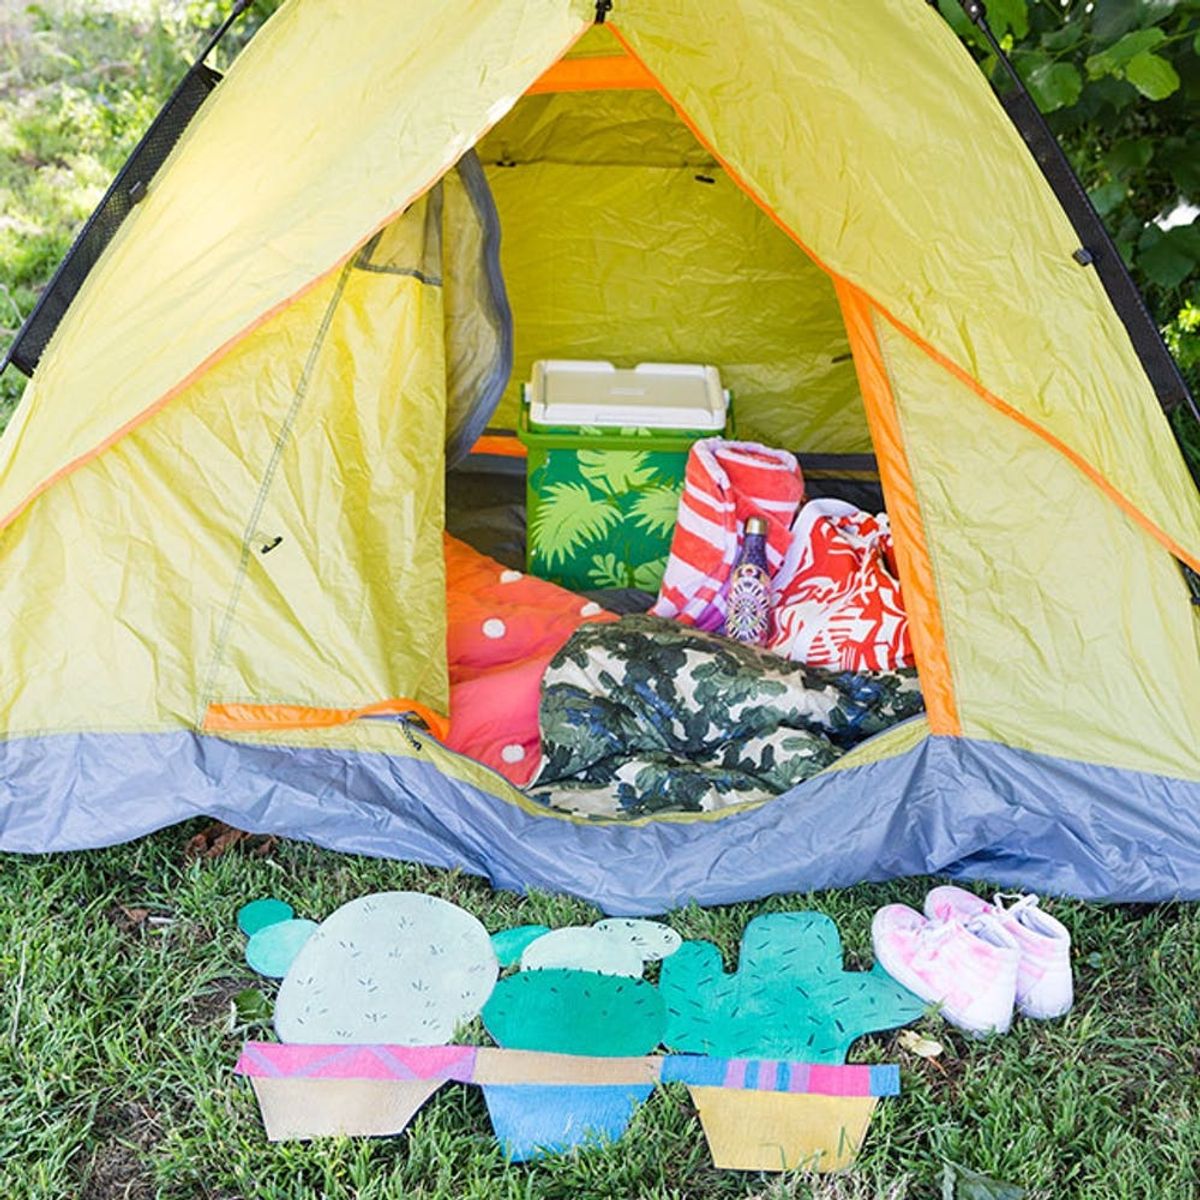 Create This Roll-Up Cactus Mat for Your Summer Camping Trips